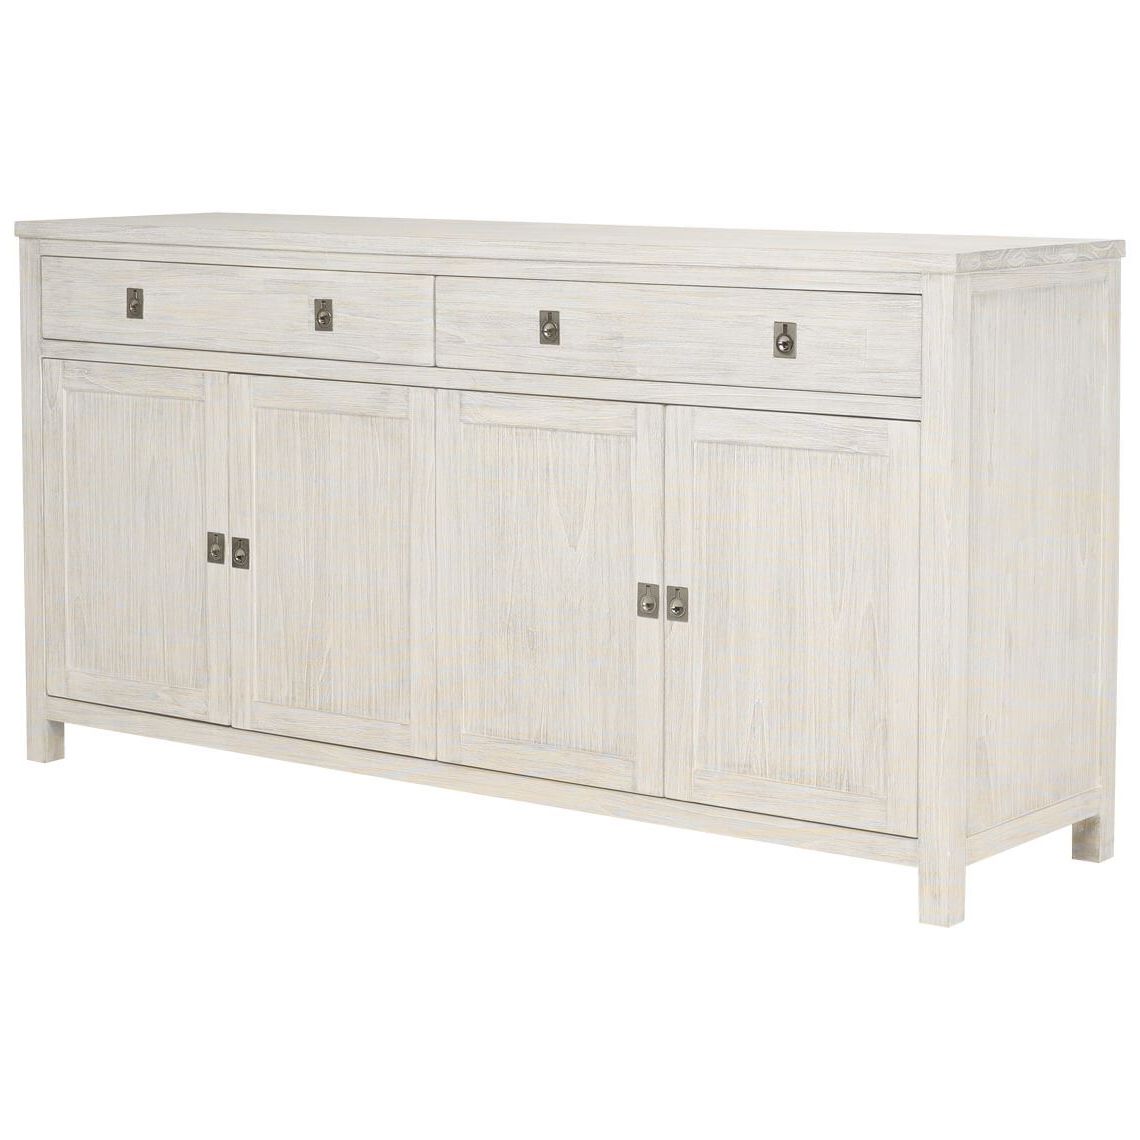 Most Recent 2 Door White Wash Sideboards For Cancun Buffet (View 20 of 20)